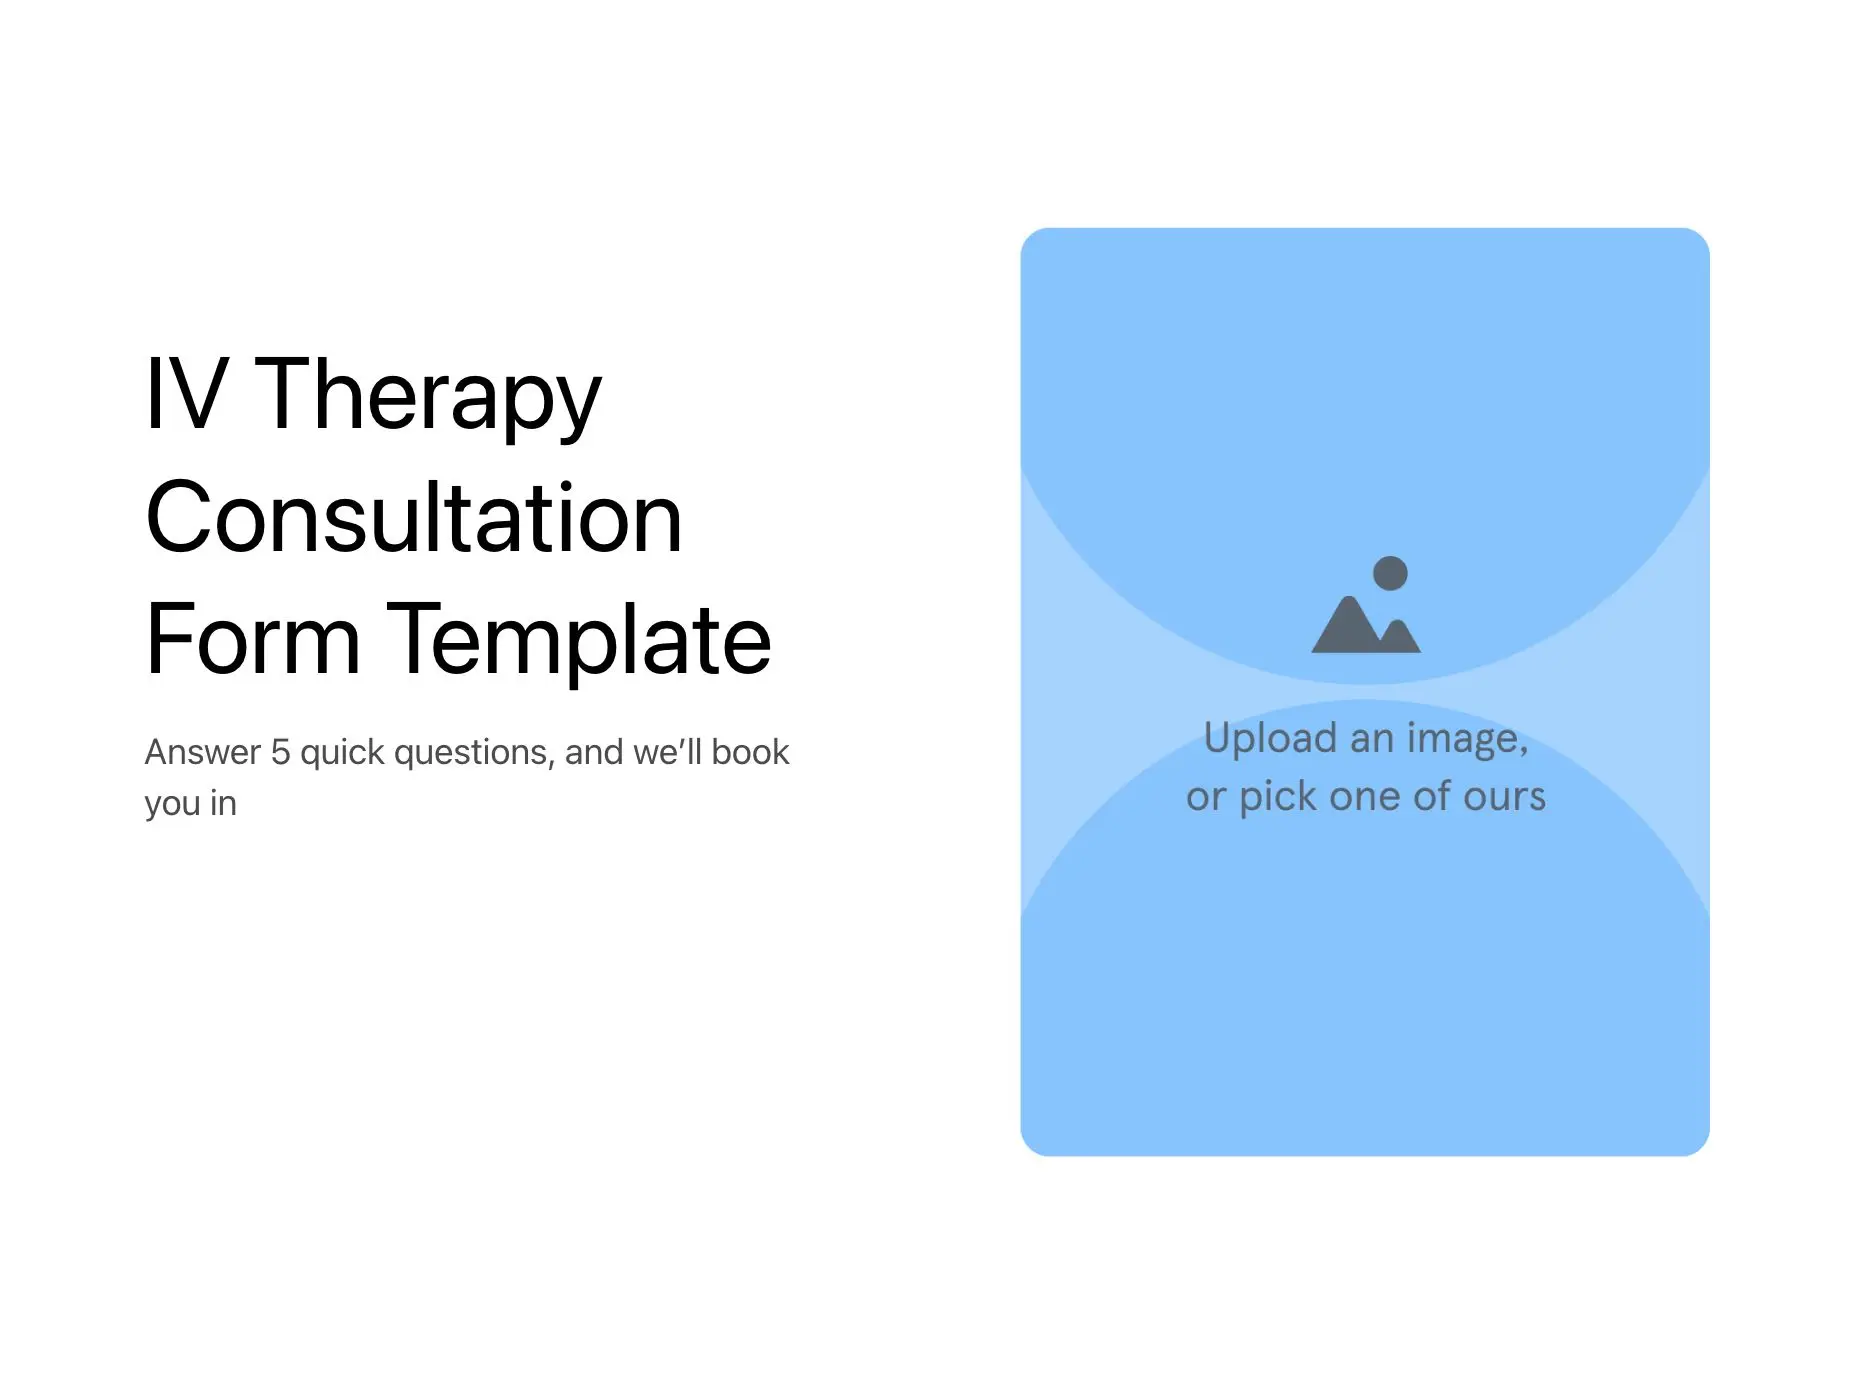 IV therapy consultation form template Hero